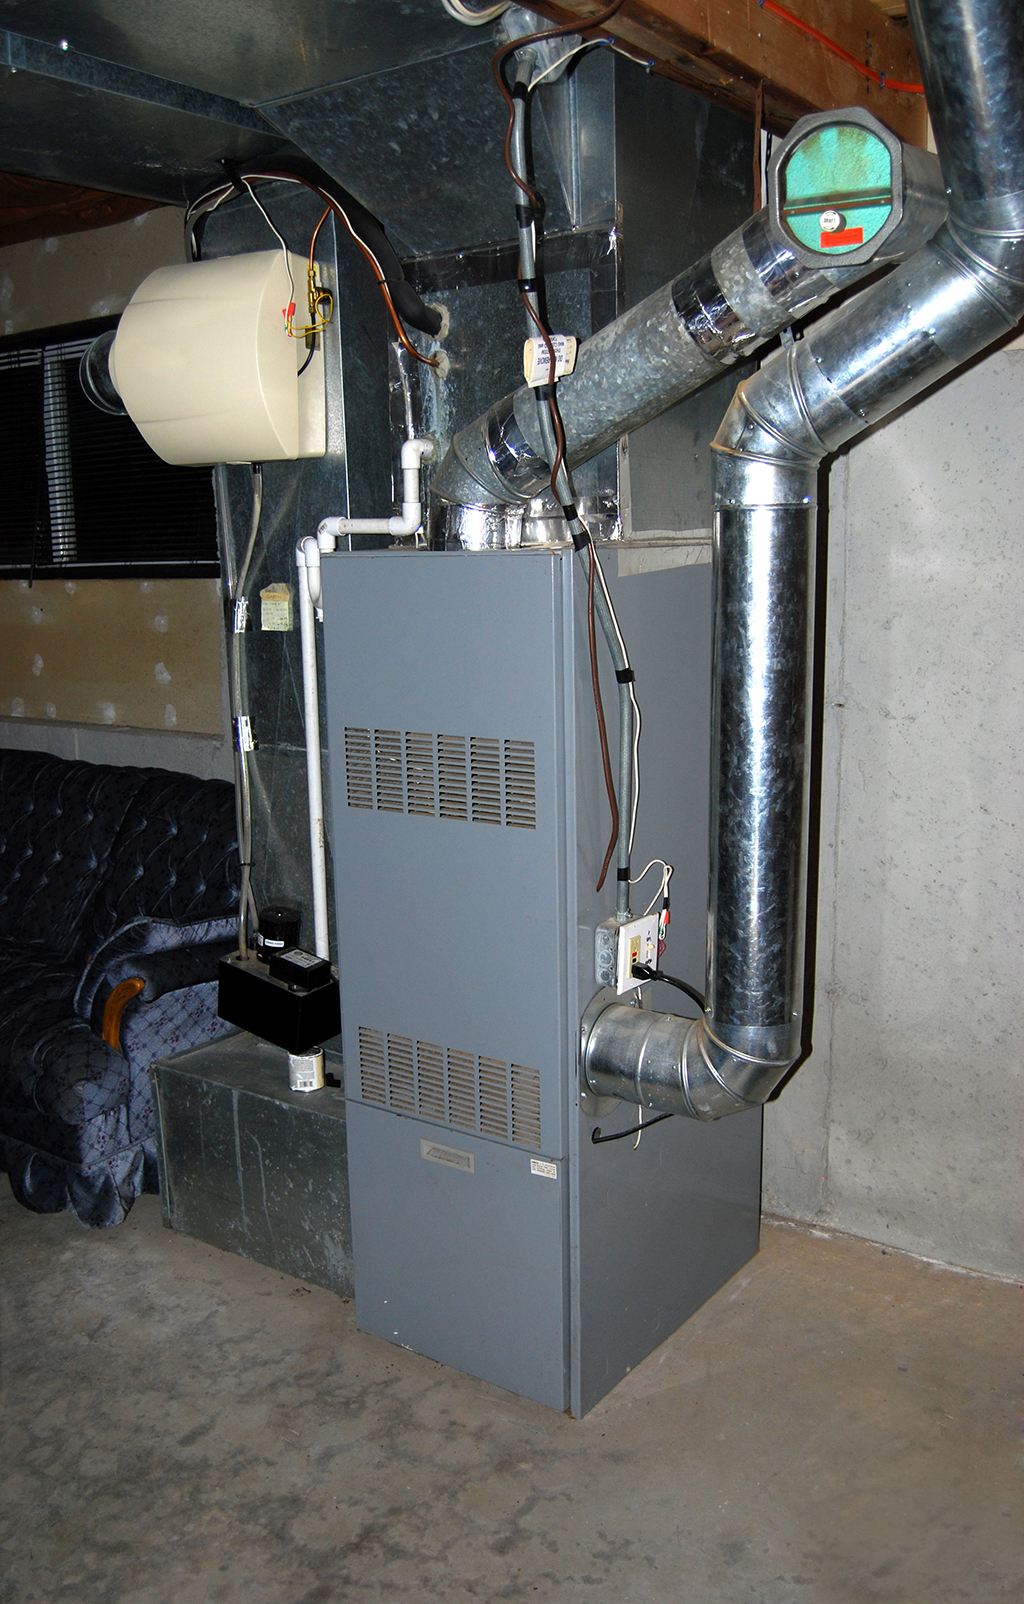 Types Of Furnaces You Can Install In Your Home According To A Heating And AC Company | San Antonio, TX